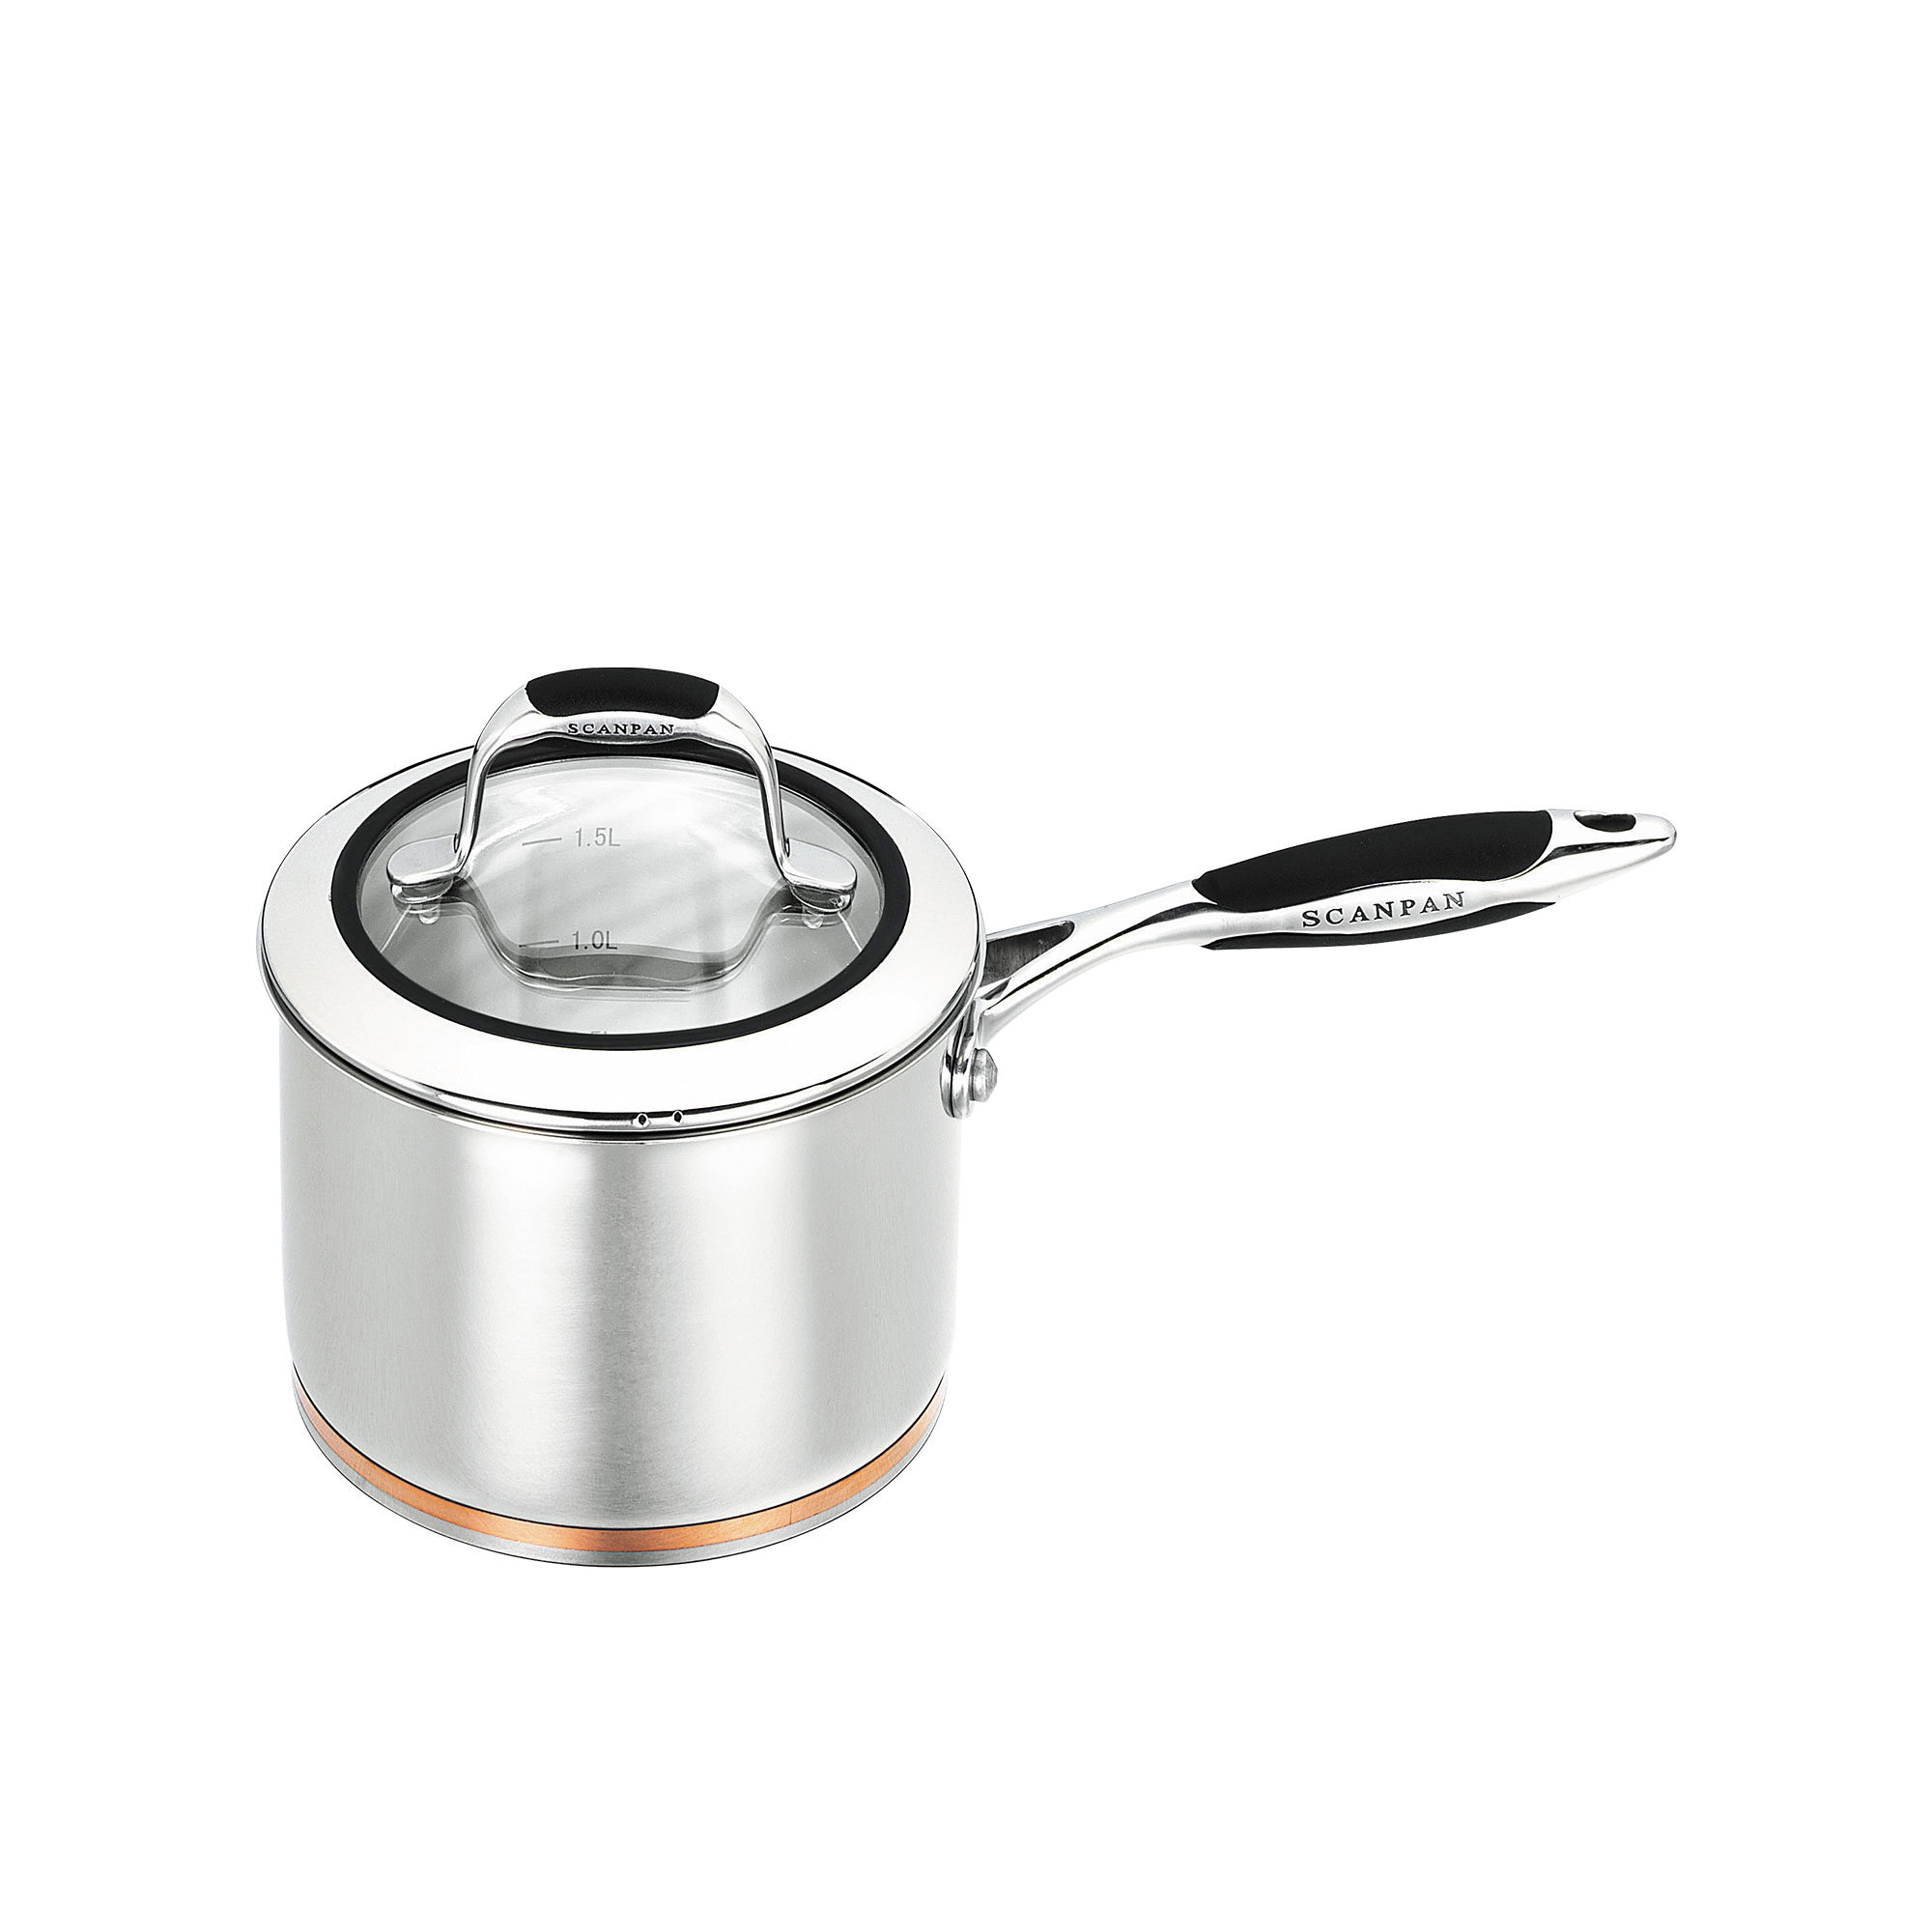 Scanpan Coppernox Stainless Steel Covered Saucepan 16cm - 1.8L Image 1